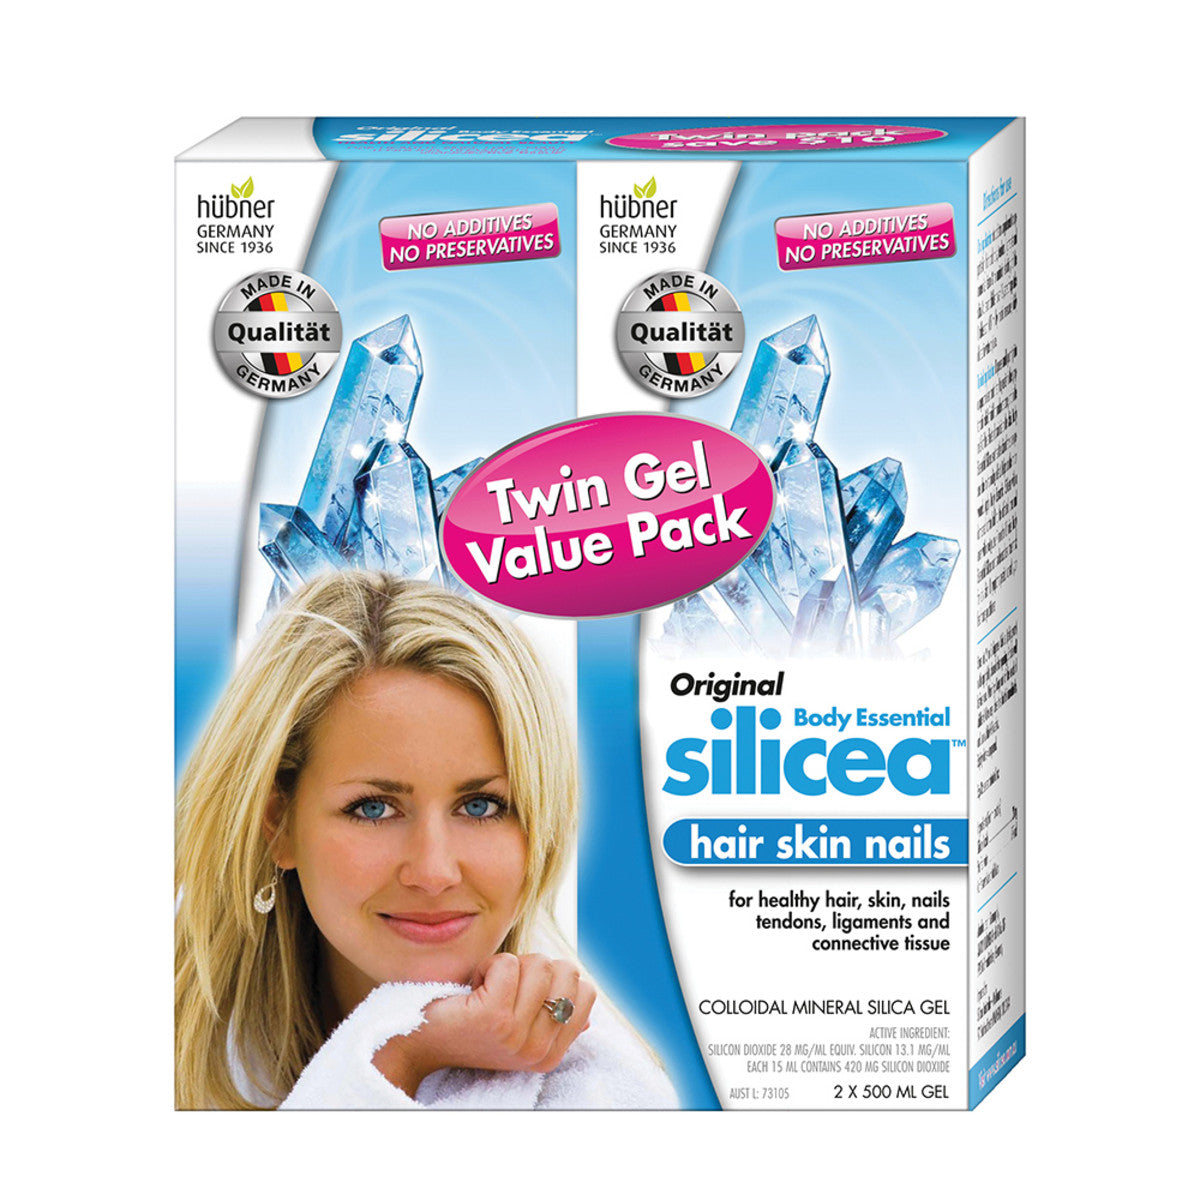 Hubner Silicea Gel Twin Pack, 2 x 500mL - Your Health Food Store and So  Much More!